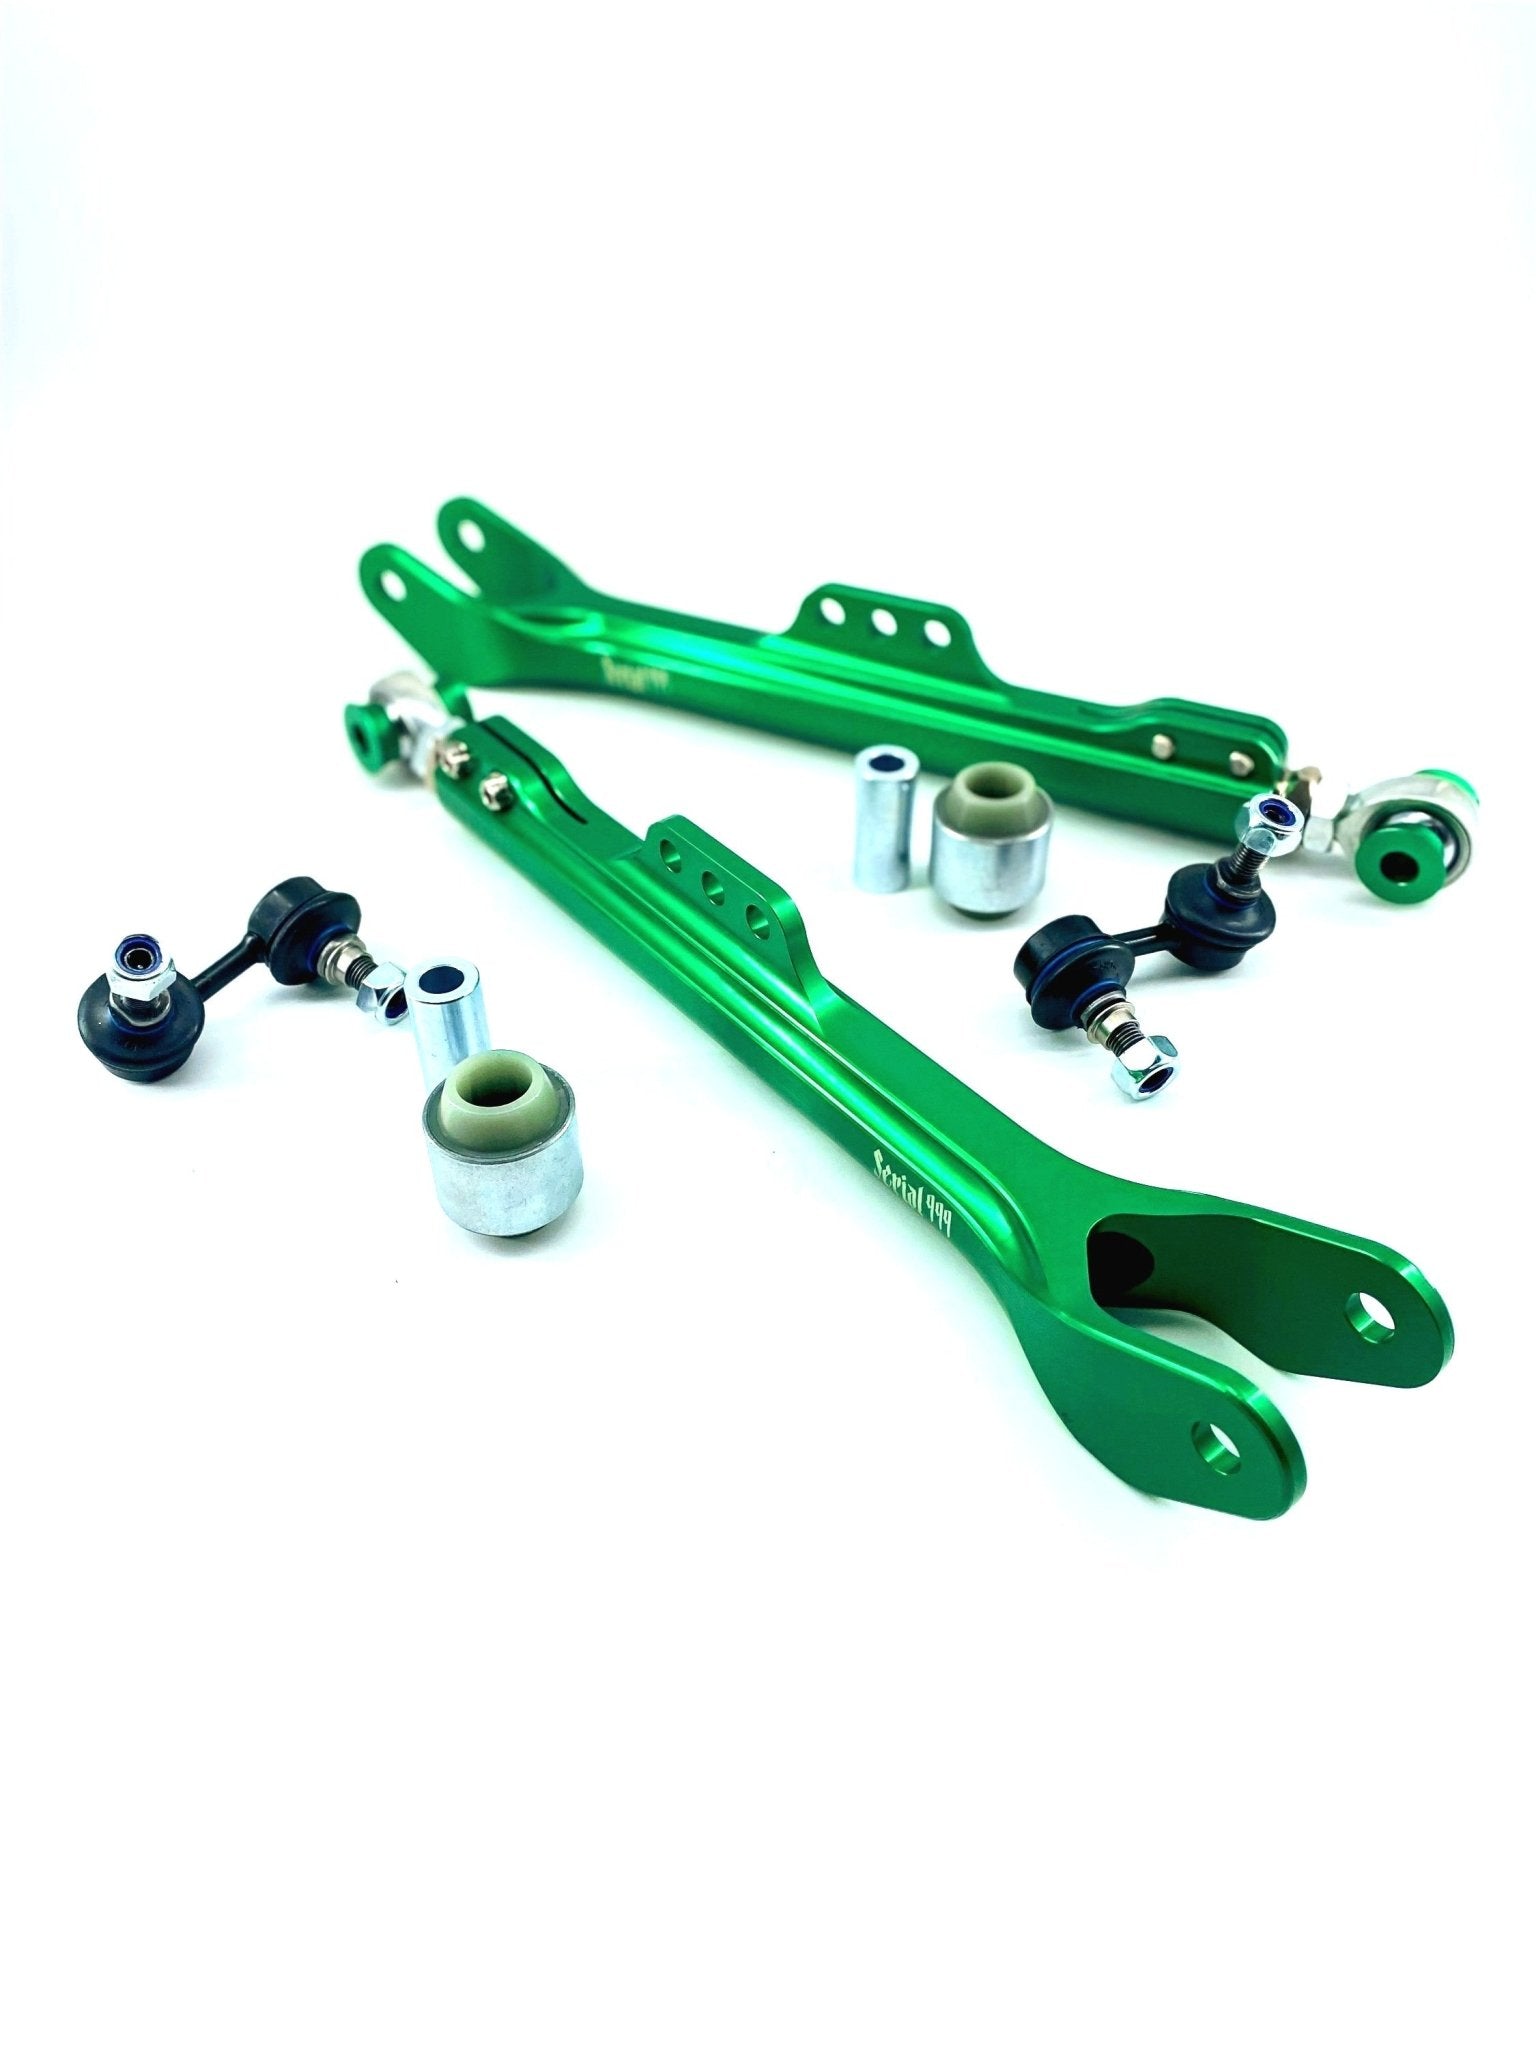 Chaser / Mark II / Cresta JZX90 / JZX100 Serial999 Rear Lower Control Arms - SERIALNINE